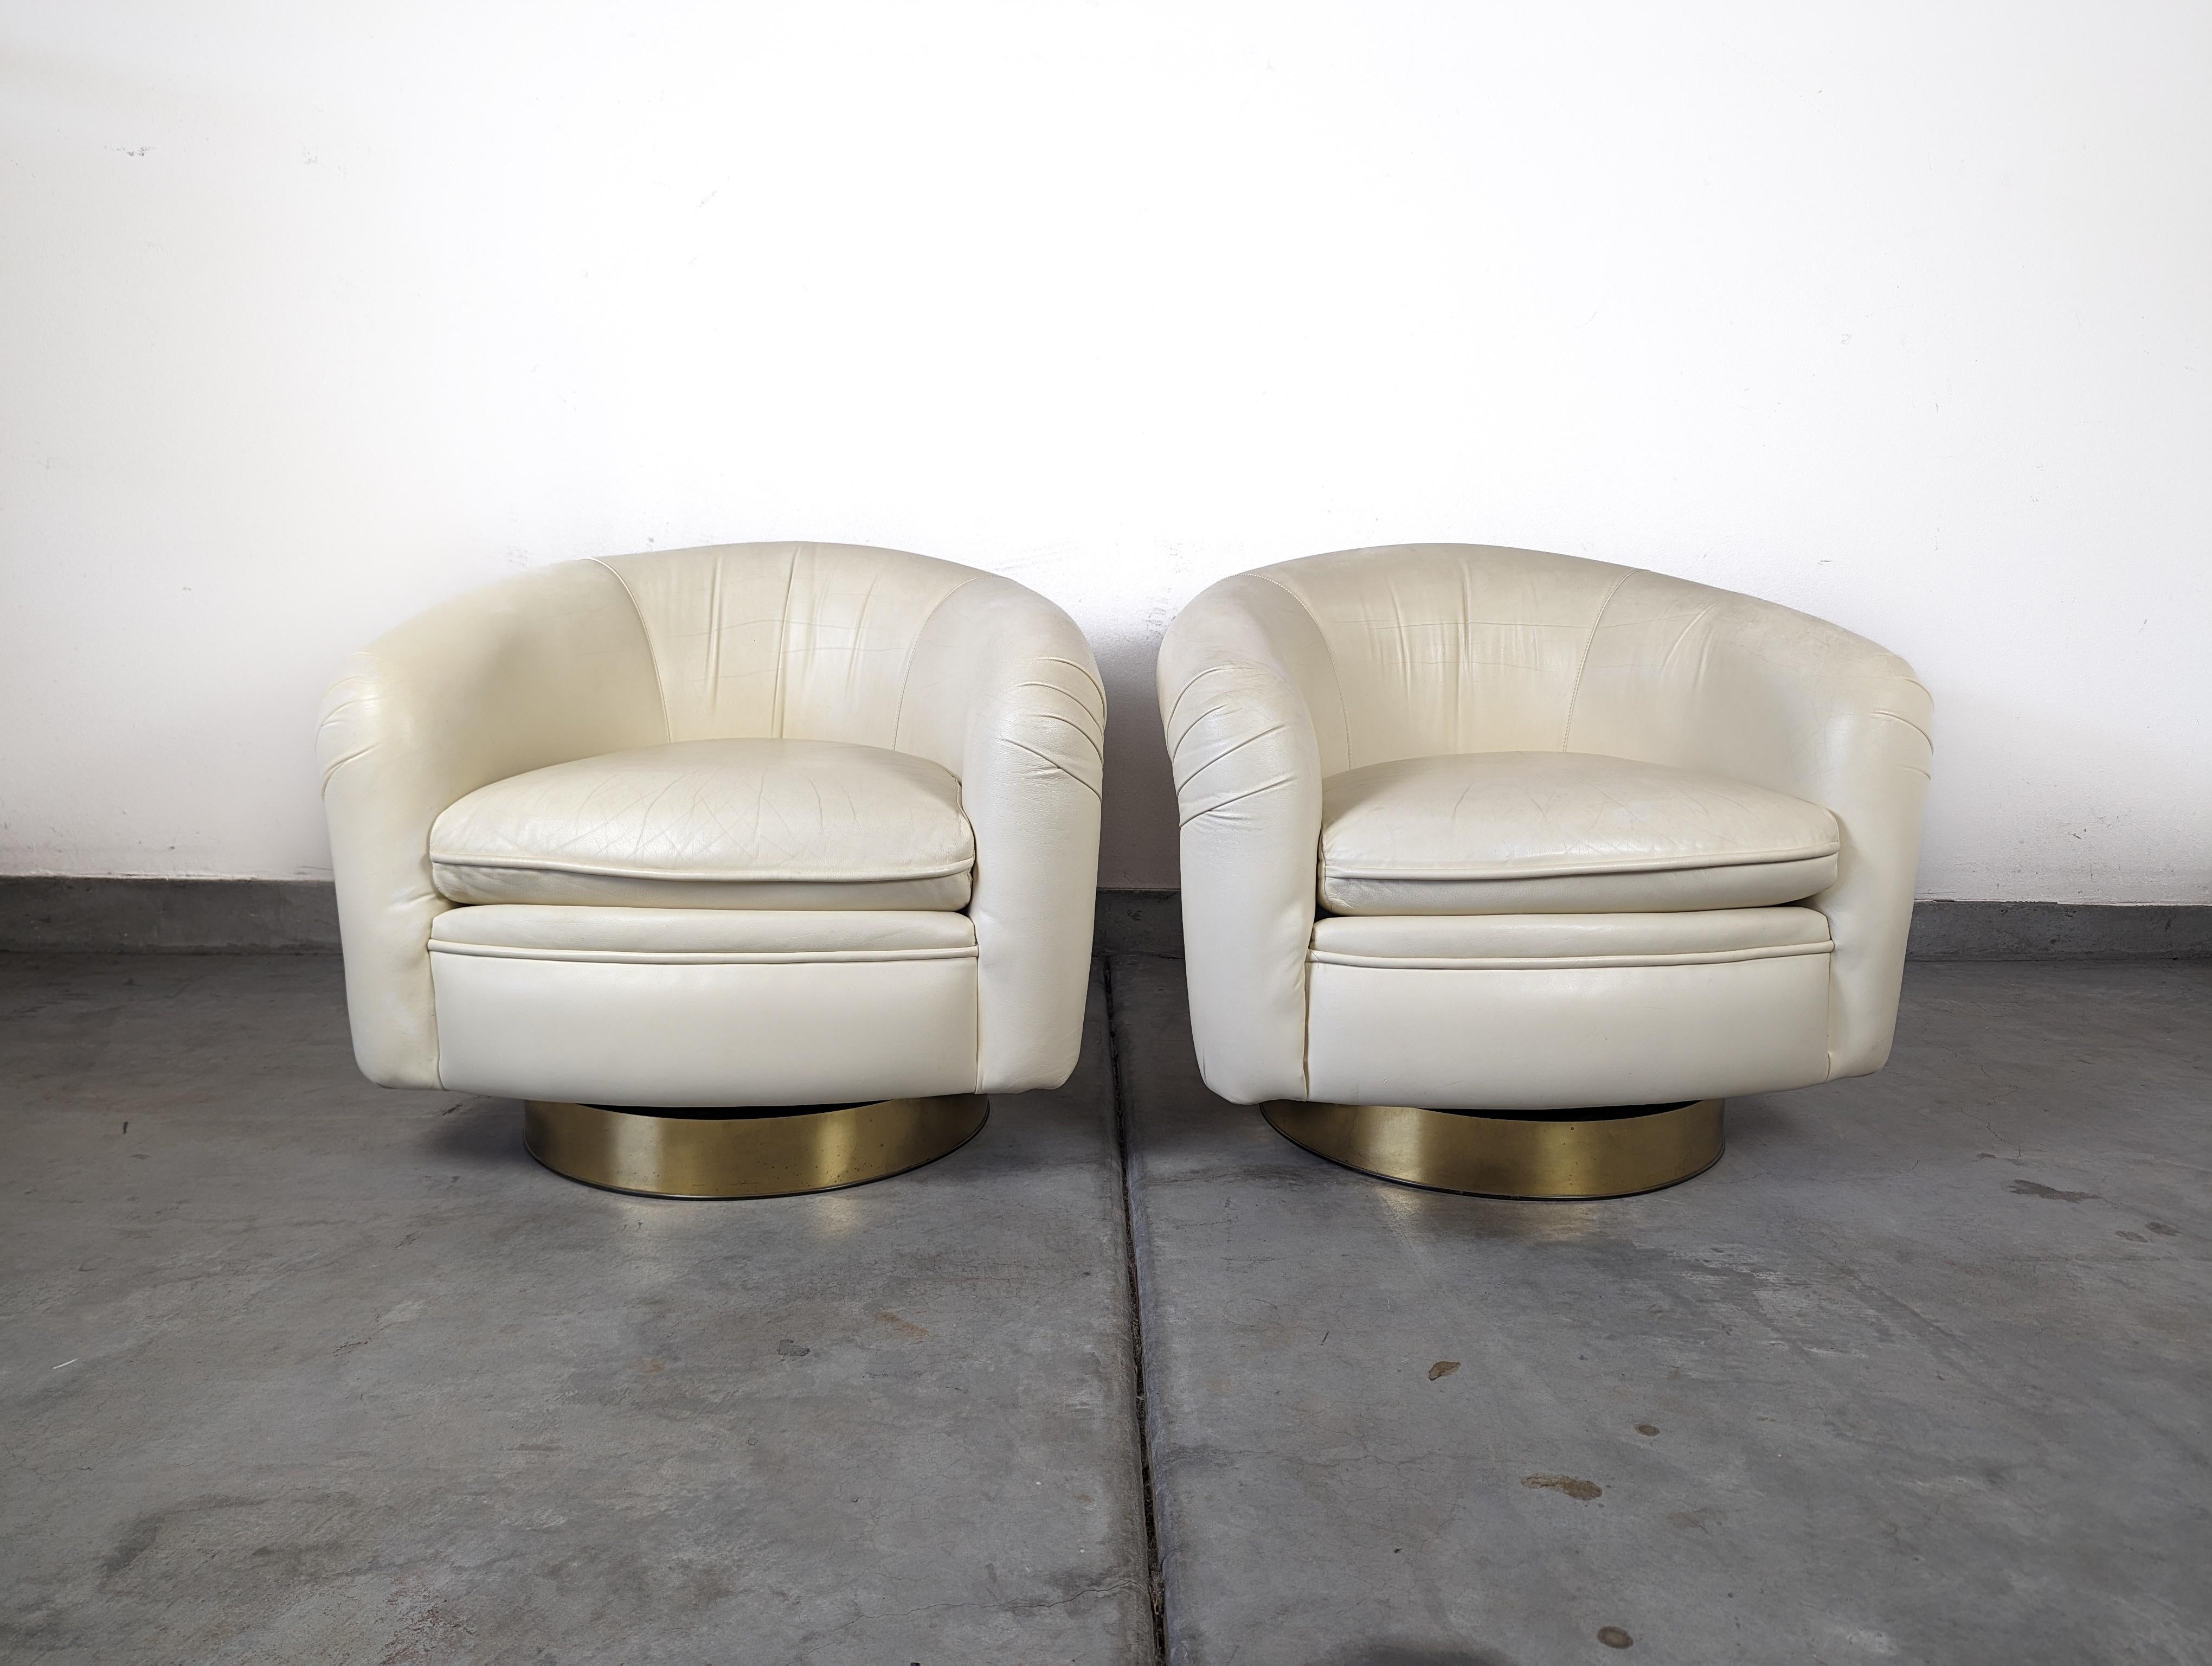 Leather Tilt Swivel Lounge Chairs by Milo Baughman for Thayer Coggin, c1970s For Sale 1